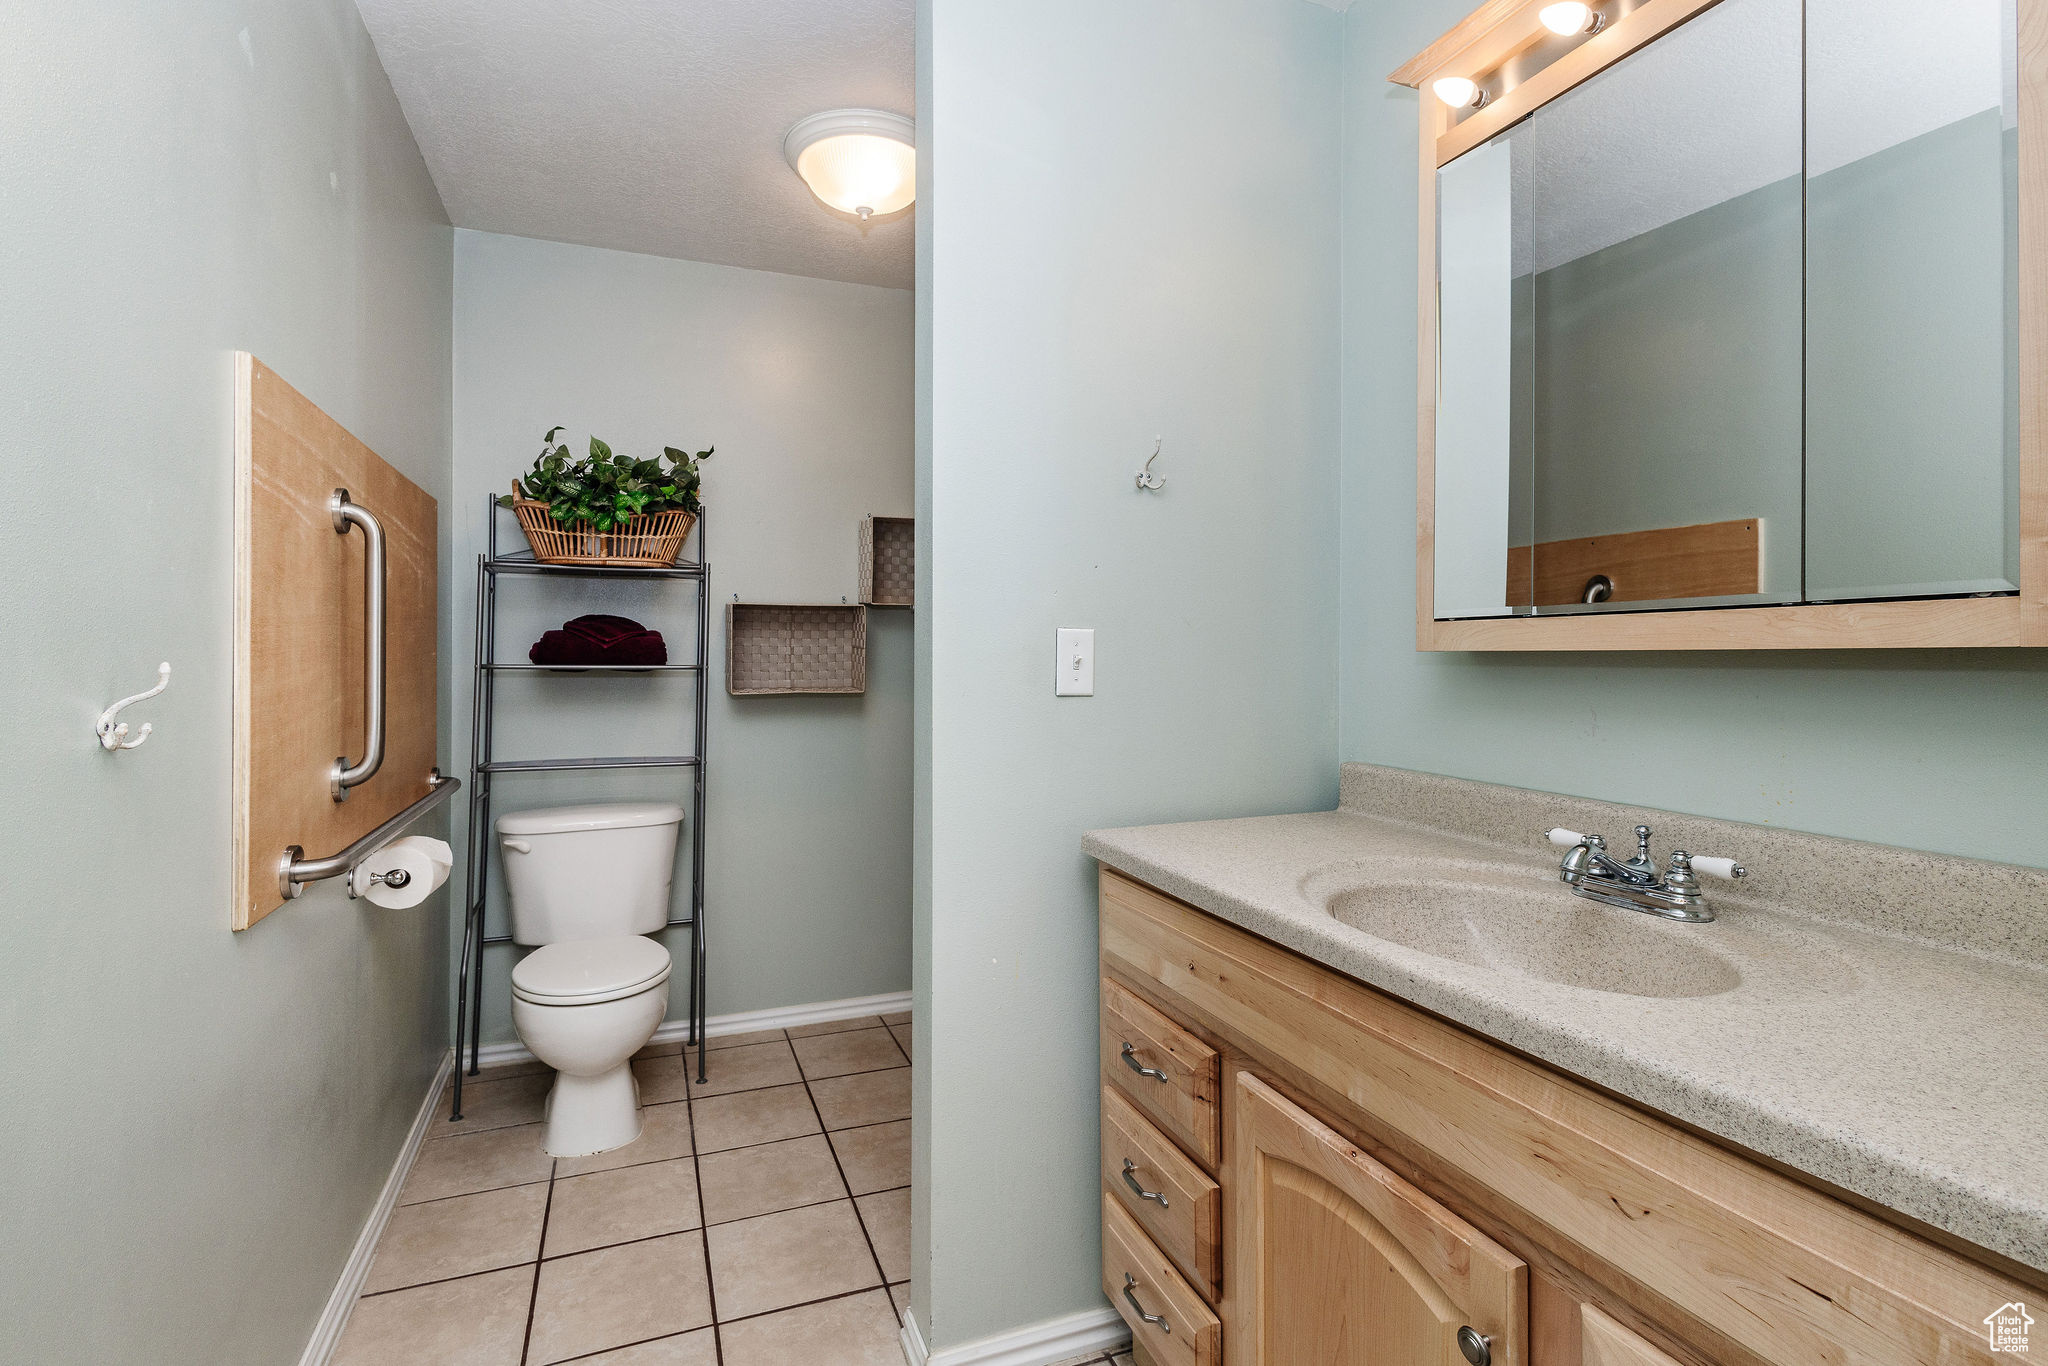 Bathroom with tile floors, toilet, and large corian vanity with solid surface sink.